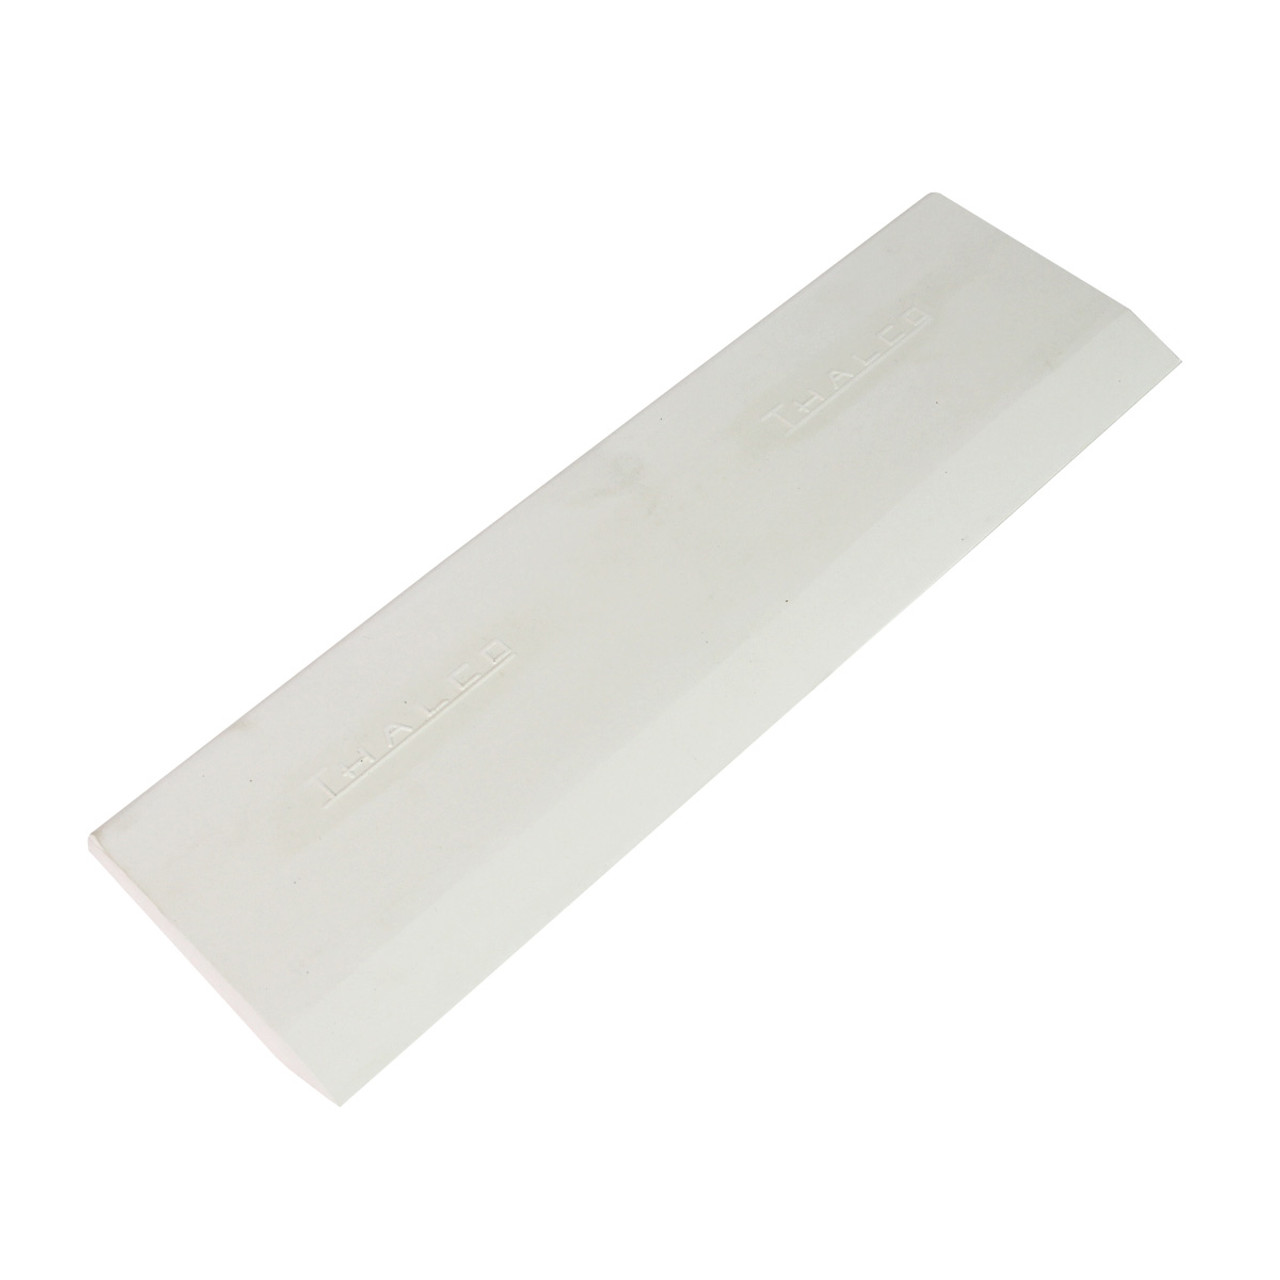 Thalco Rubber Squeegee